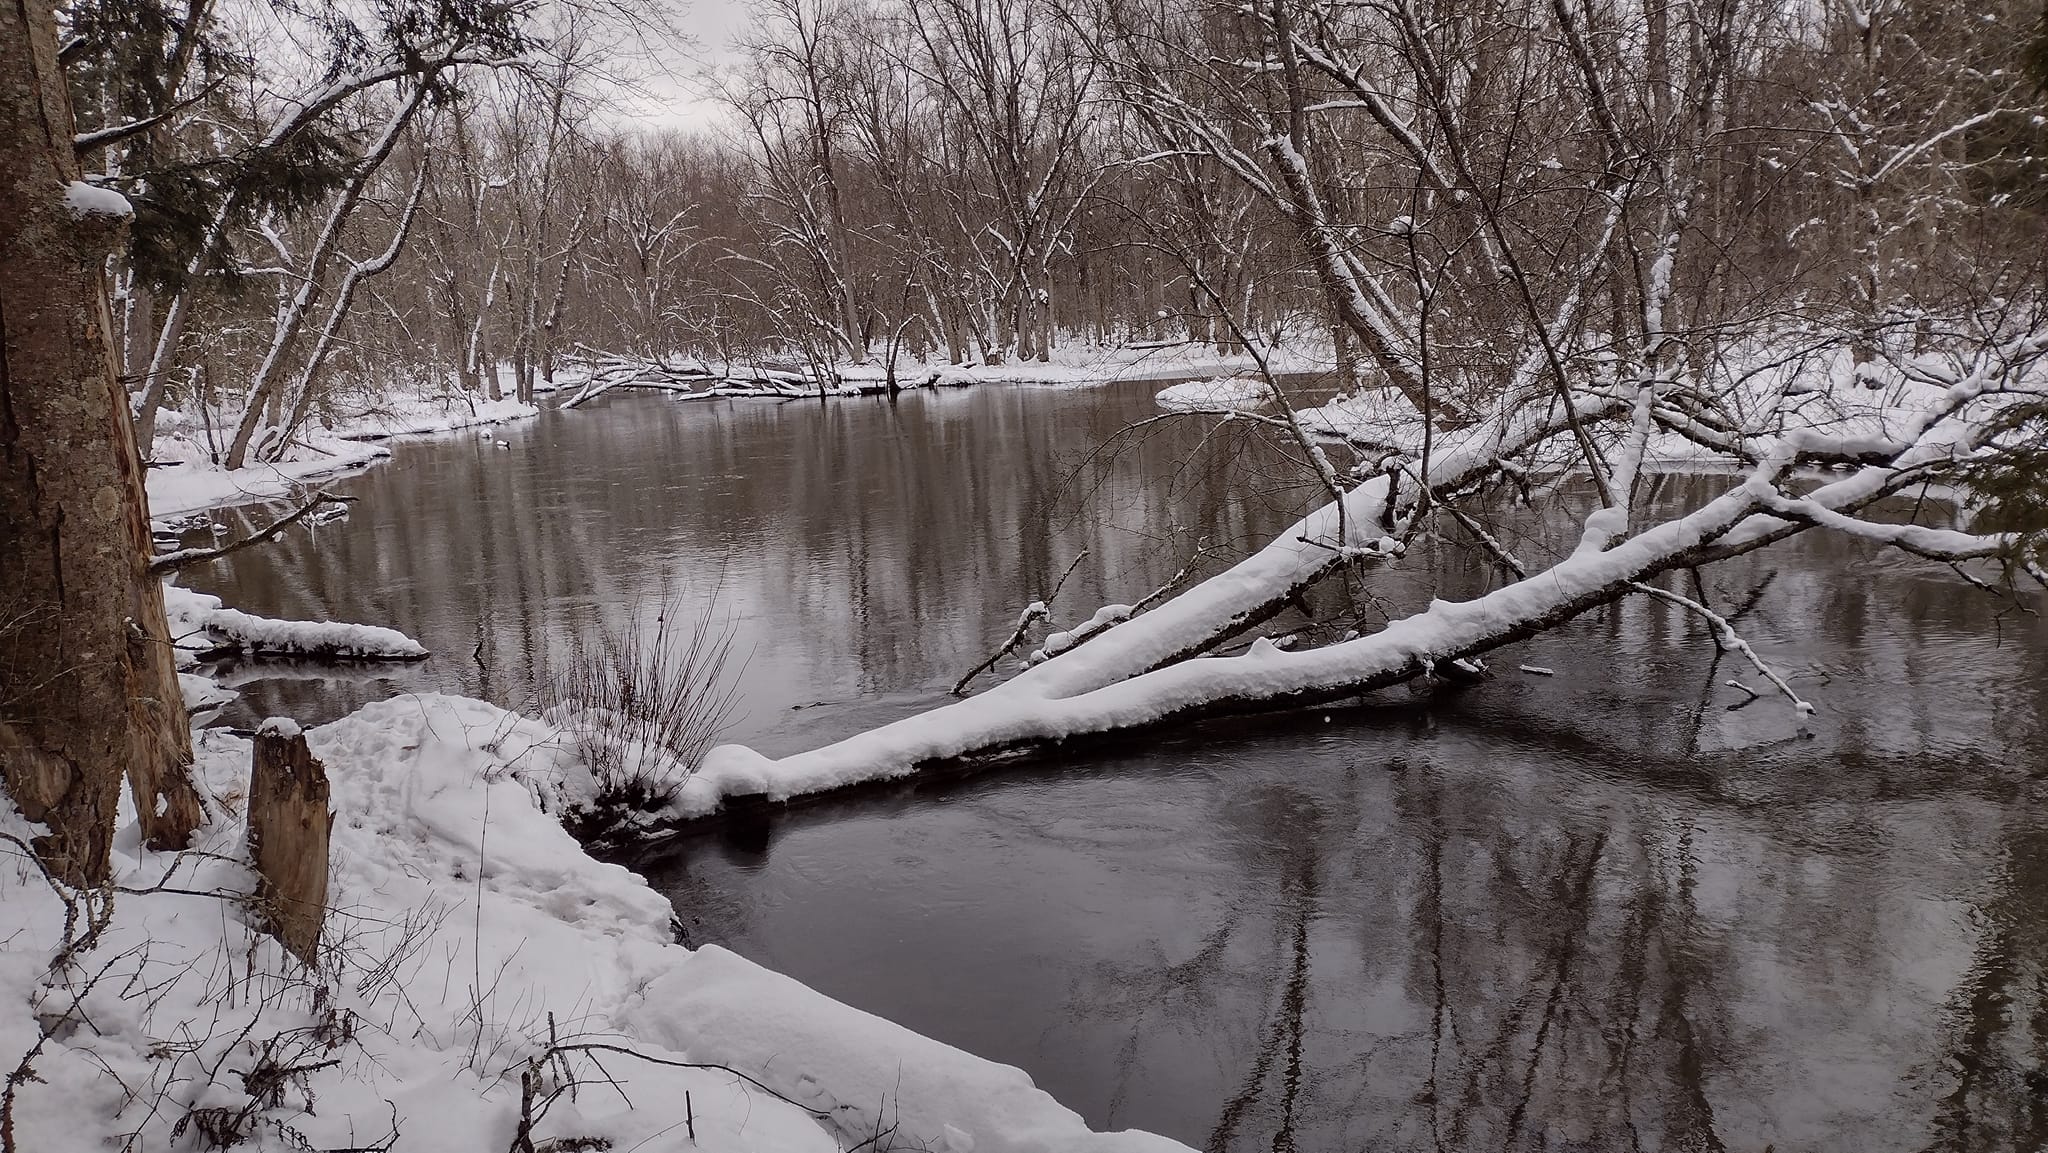 Oak creek with snow on banks and tree fallen across the creek